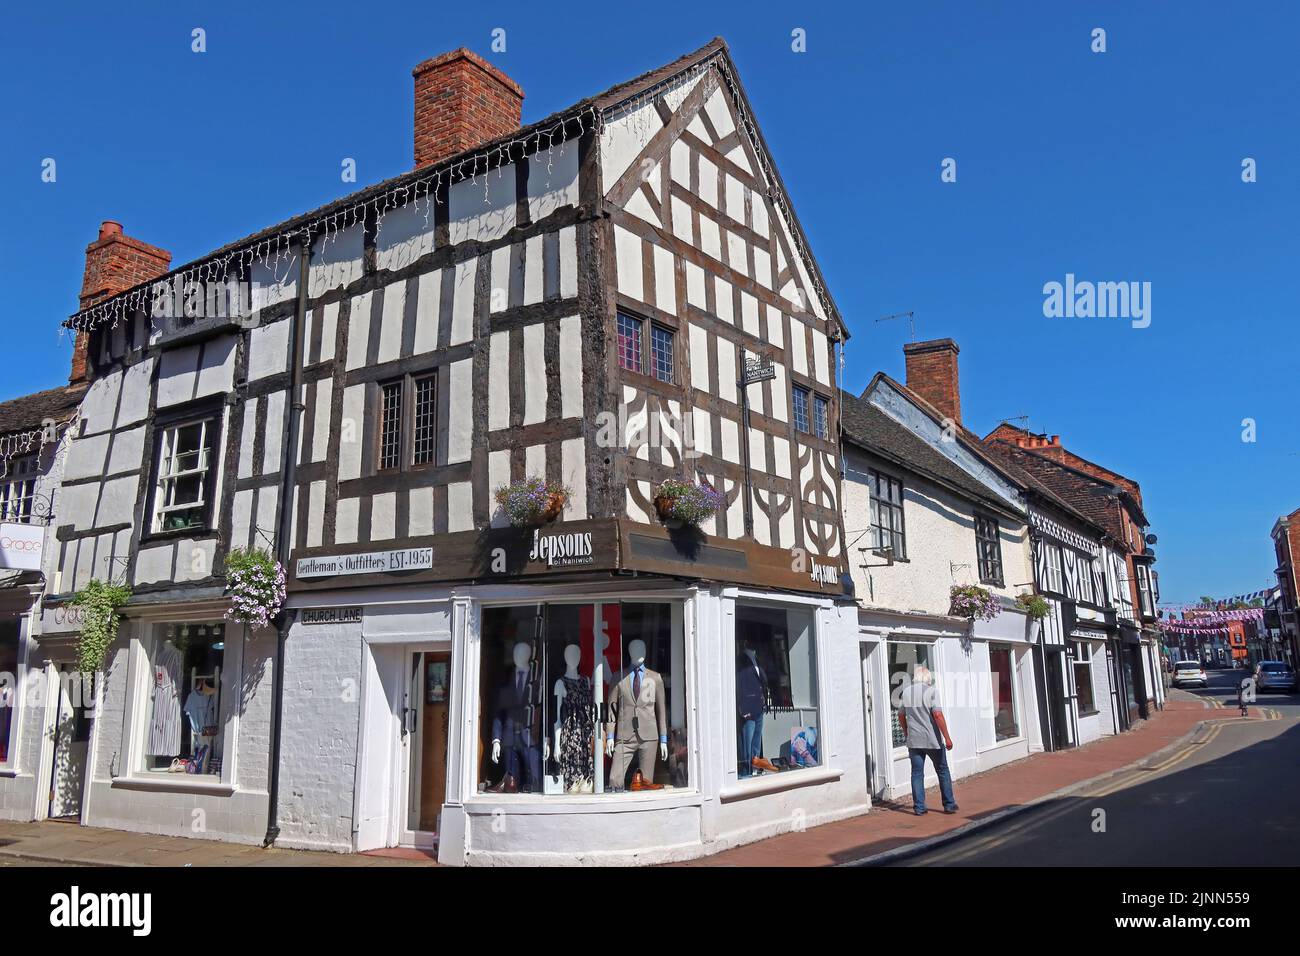 Traditional Tudor timber-framed building, Jepsons clothing store, Jepsons of Nantwich , 9-13 Hospital St, Nantwich, Cheshire, England, UK,  CW5 5RL Stock Photo